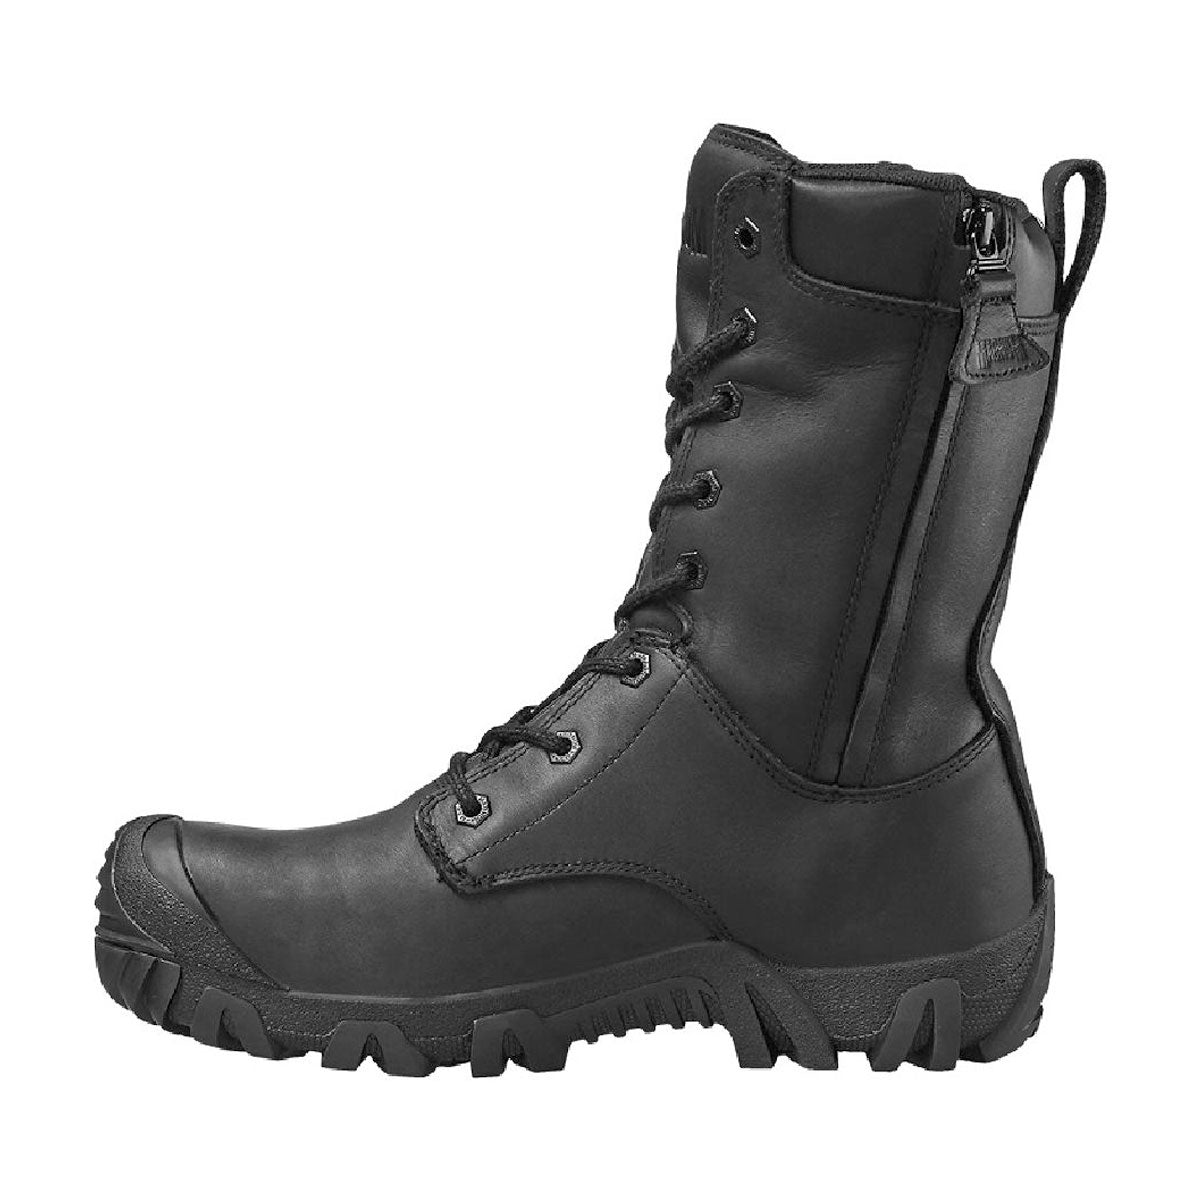 Magnum Vulcan PRO Leather Double Side-Zip Composite Toe and Plate Waterproof Boot Footwear Magnum Footwear Tactical Gear Supplier Tactical Distributors Australia